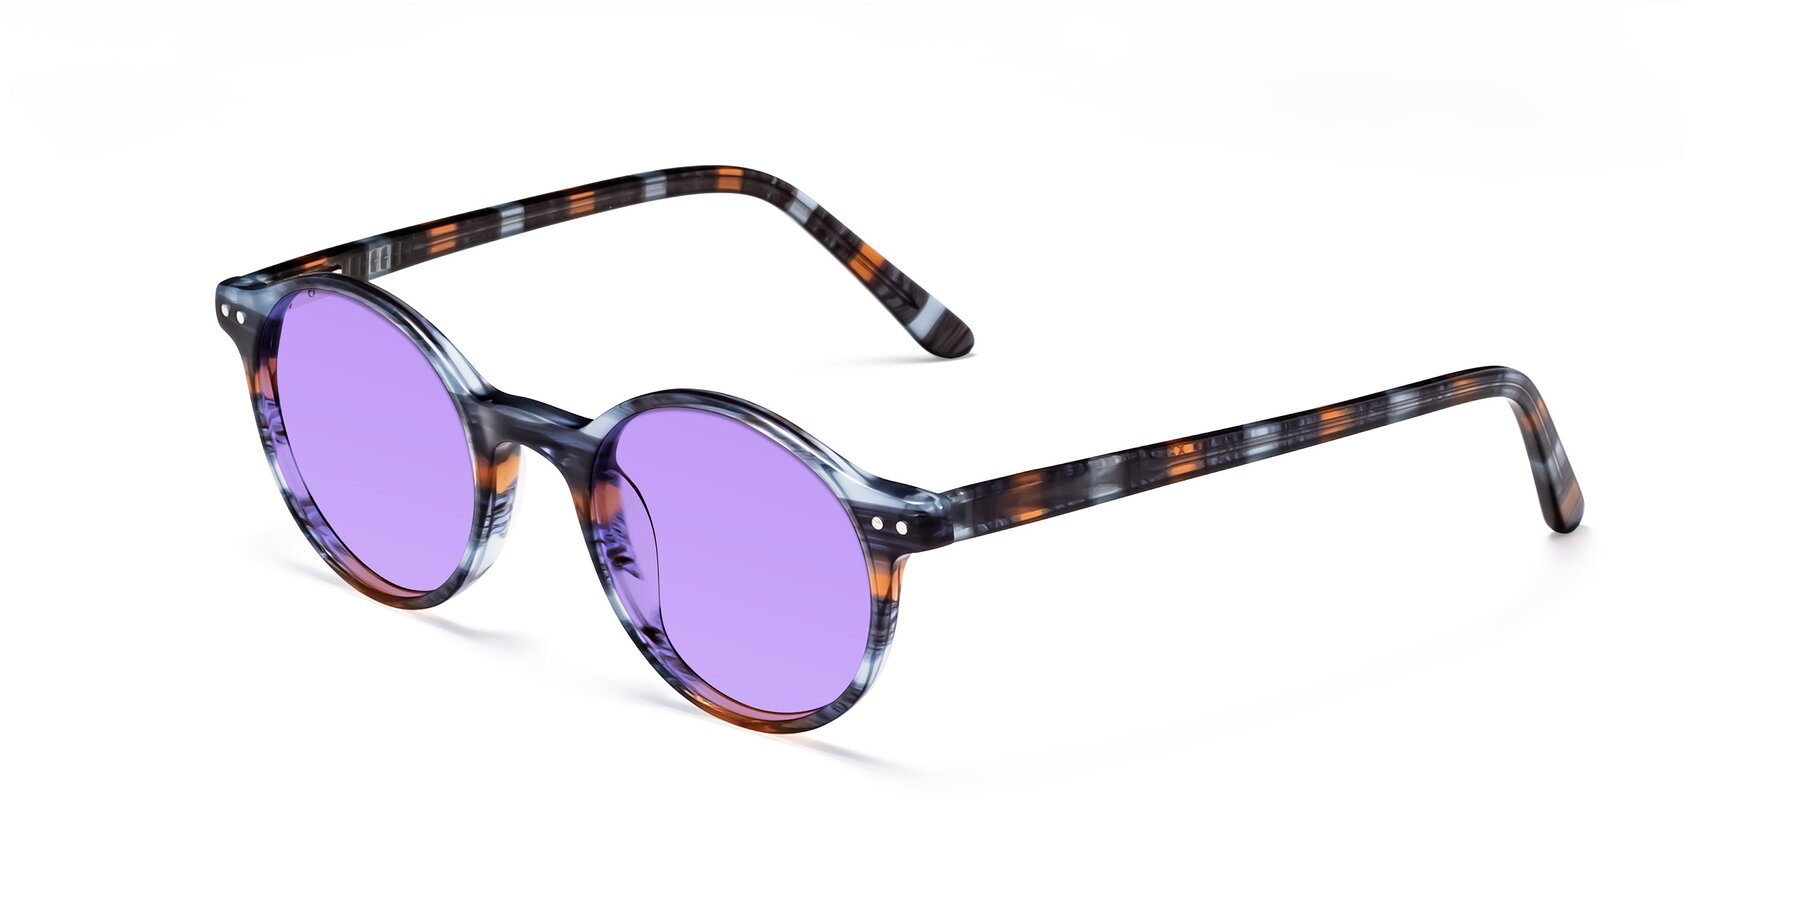 Angle of Jardi in Stripe Blue Brown with Medium Purple Tinted Lenses